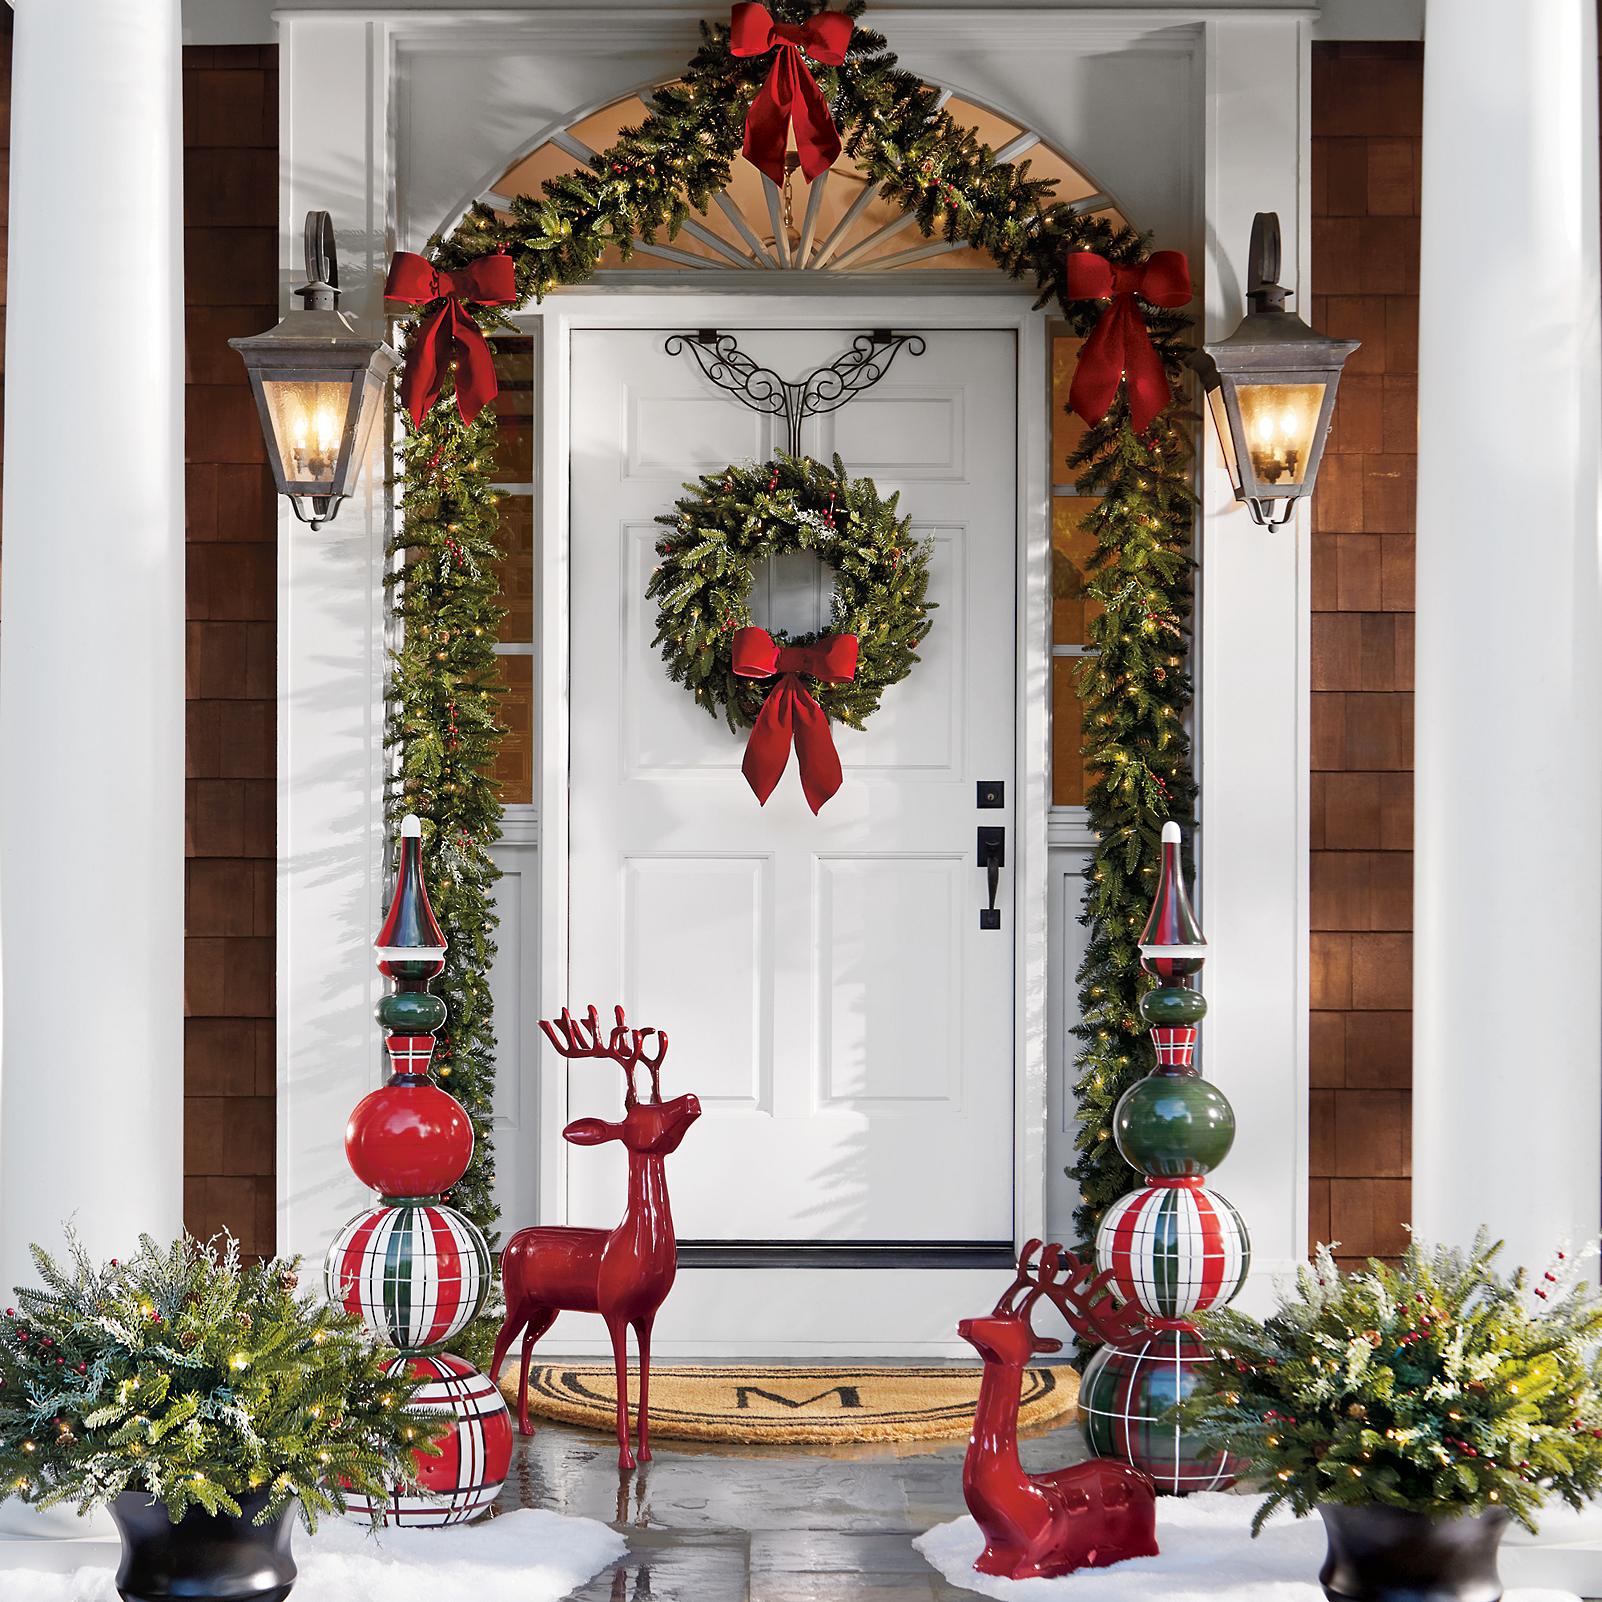 Artificial Green Eucalyptus Wreaths for Front Door Wreath White Berry Wreath Lighted Wreaths for Outdoors